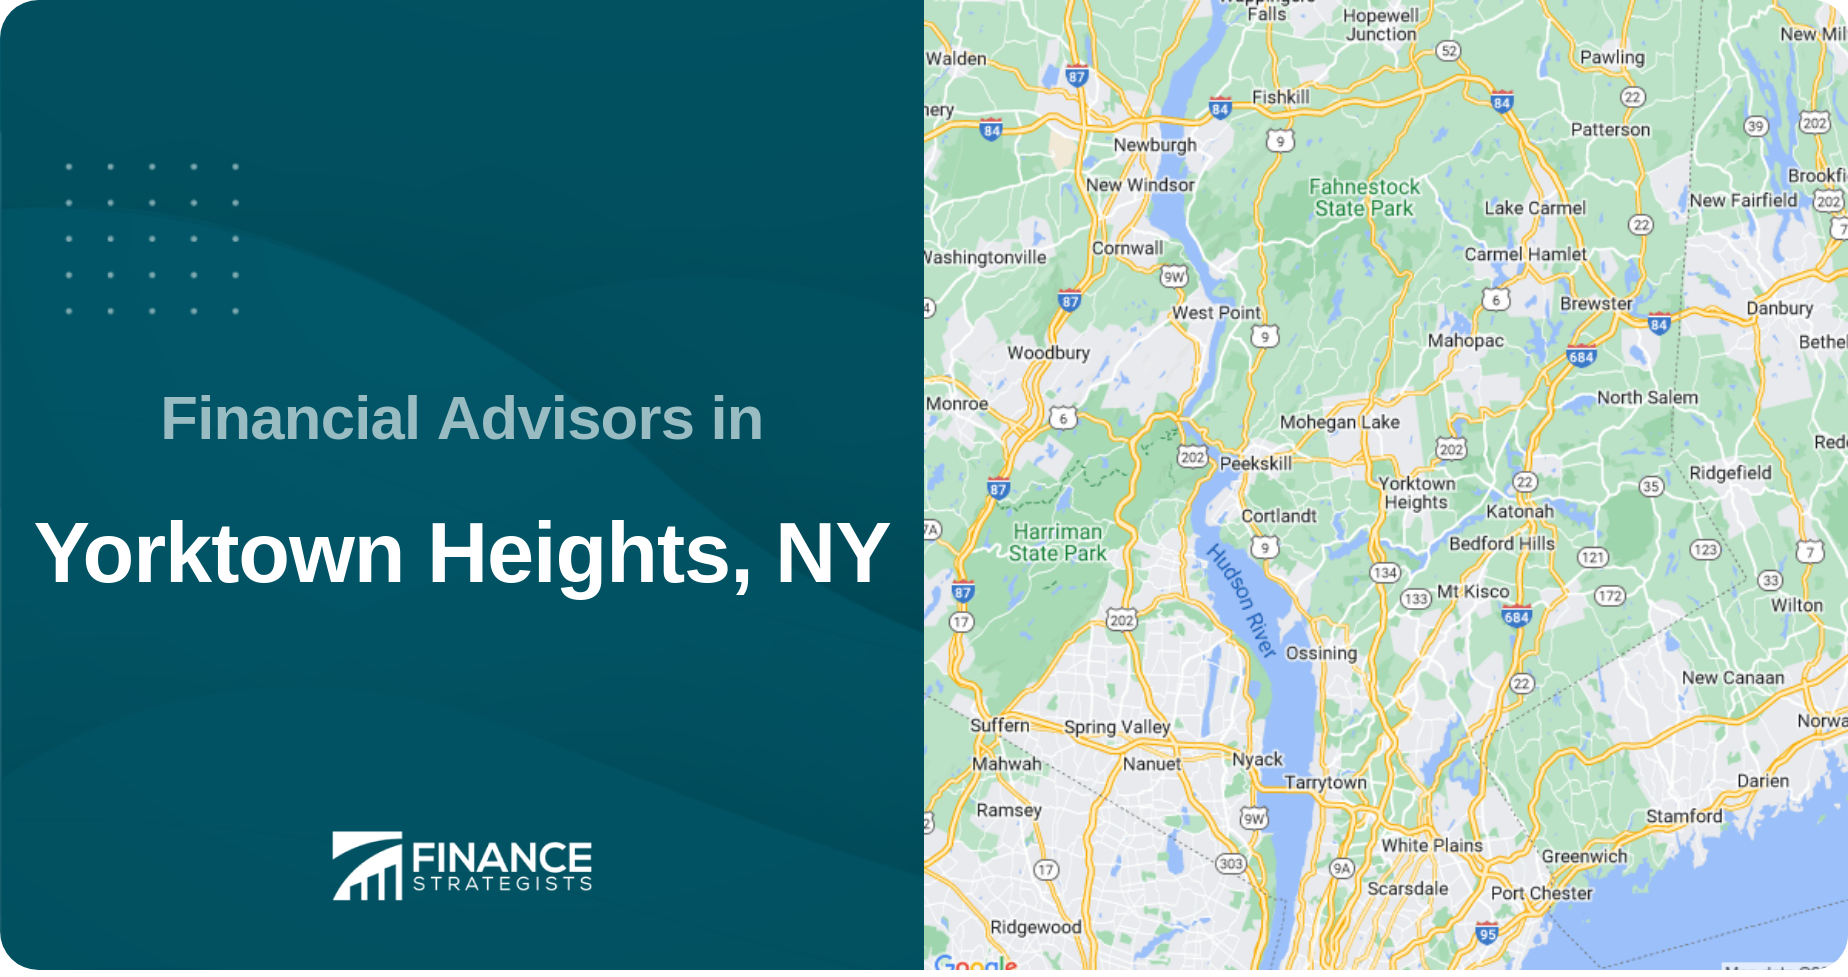 Financial Advisors in Yorktown Heights, NY